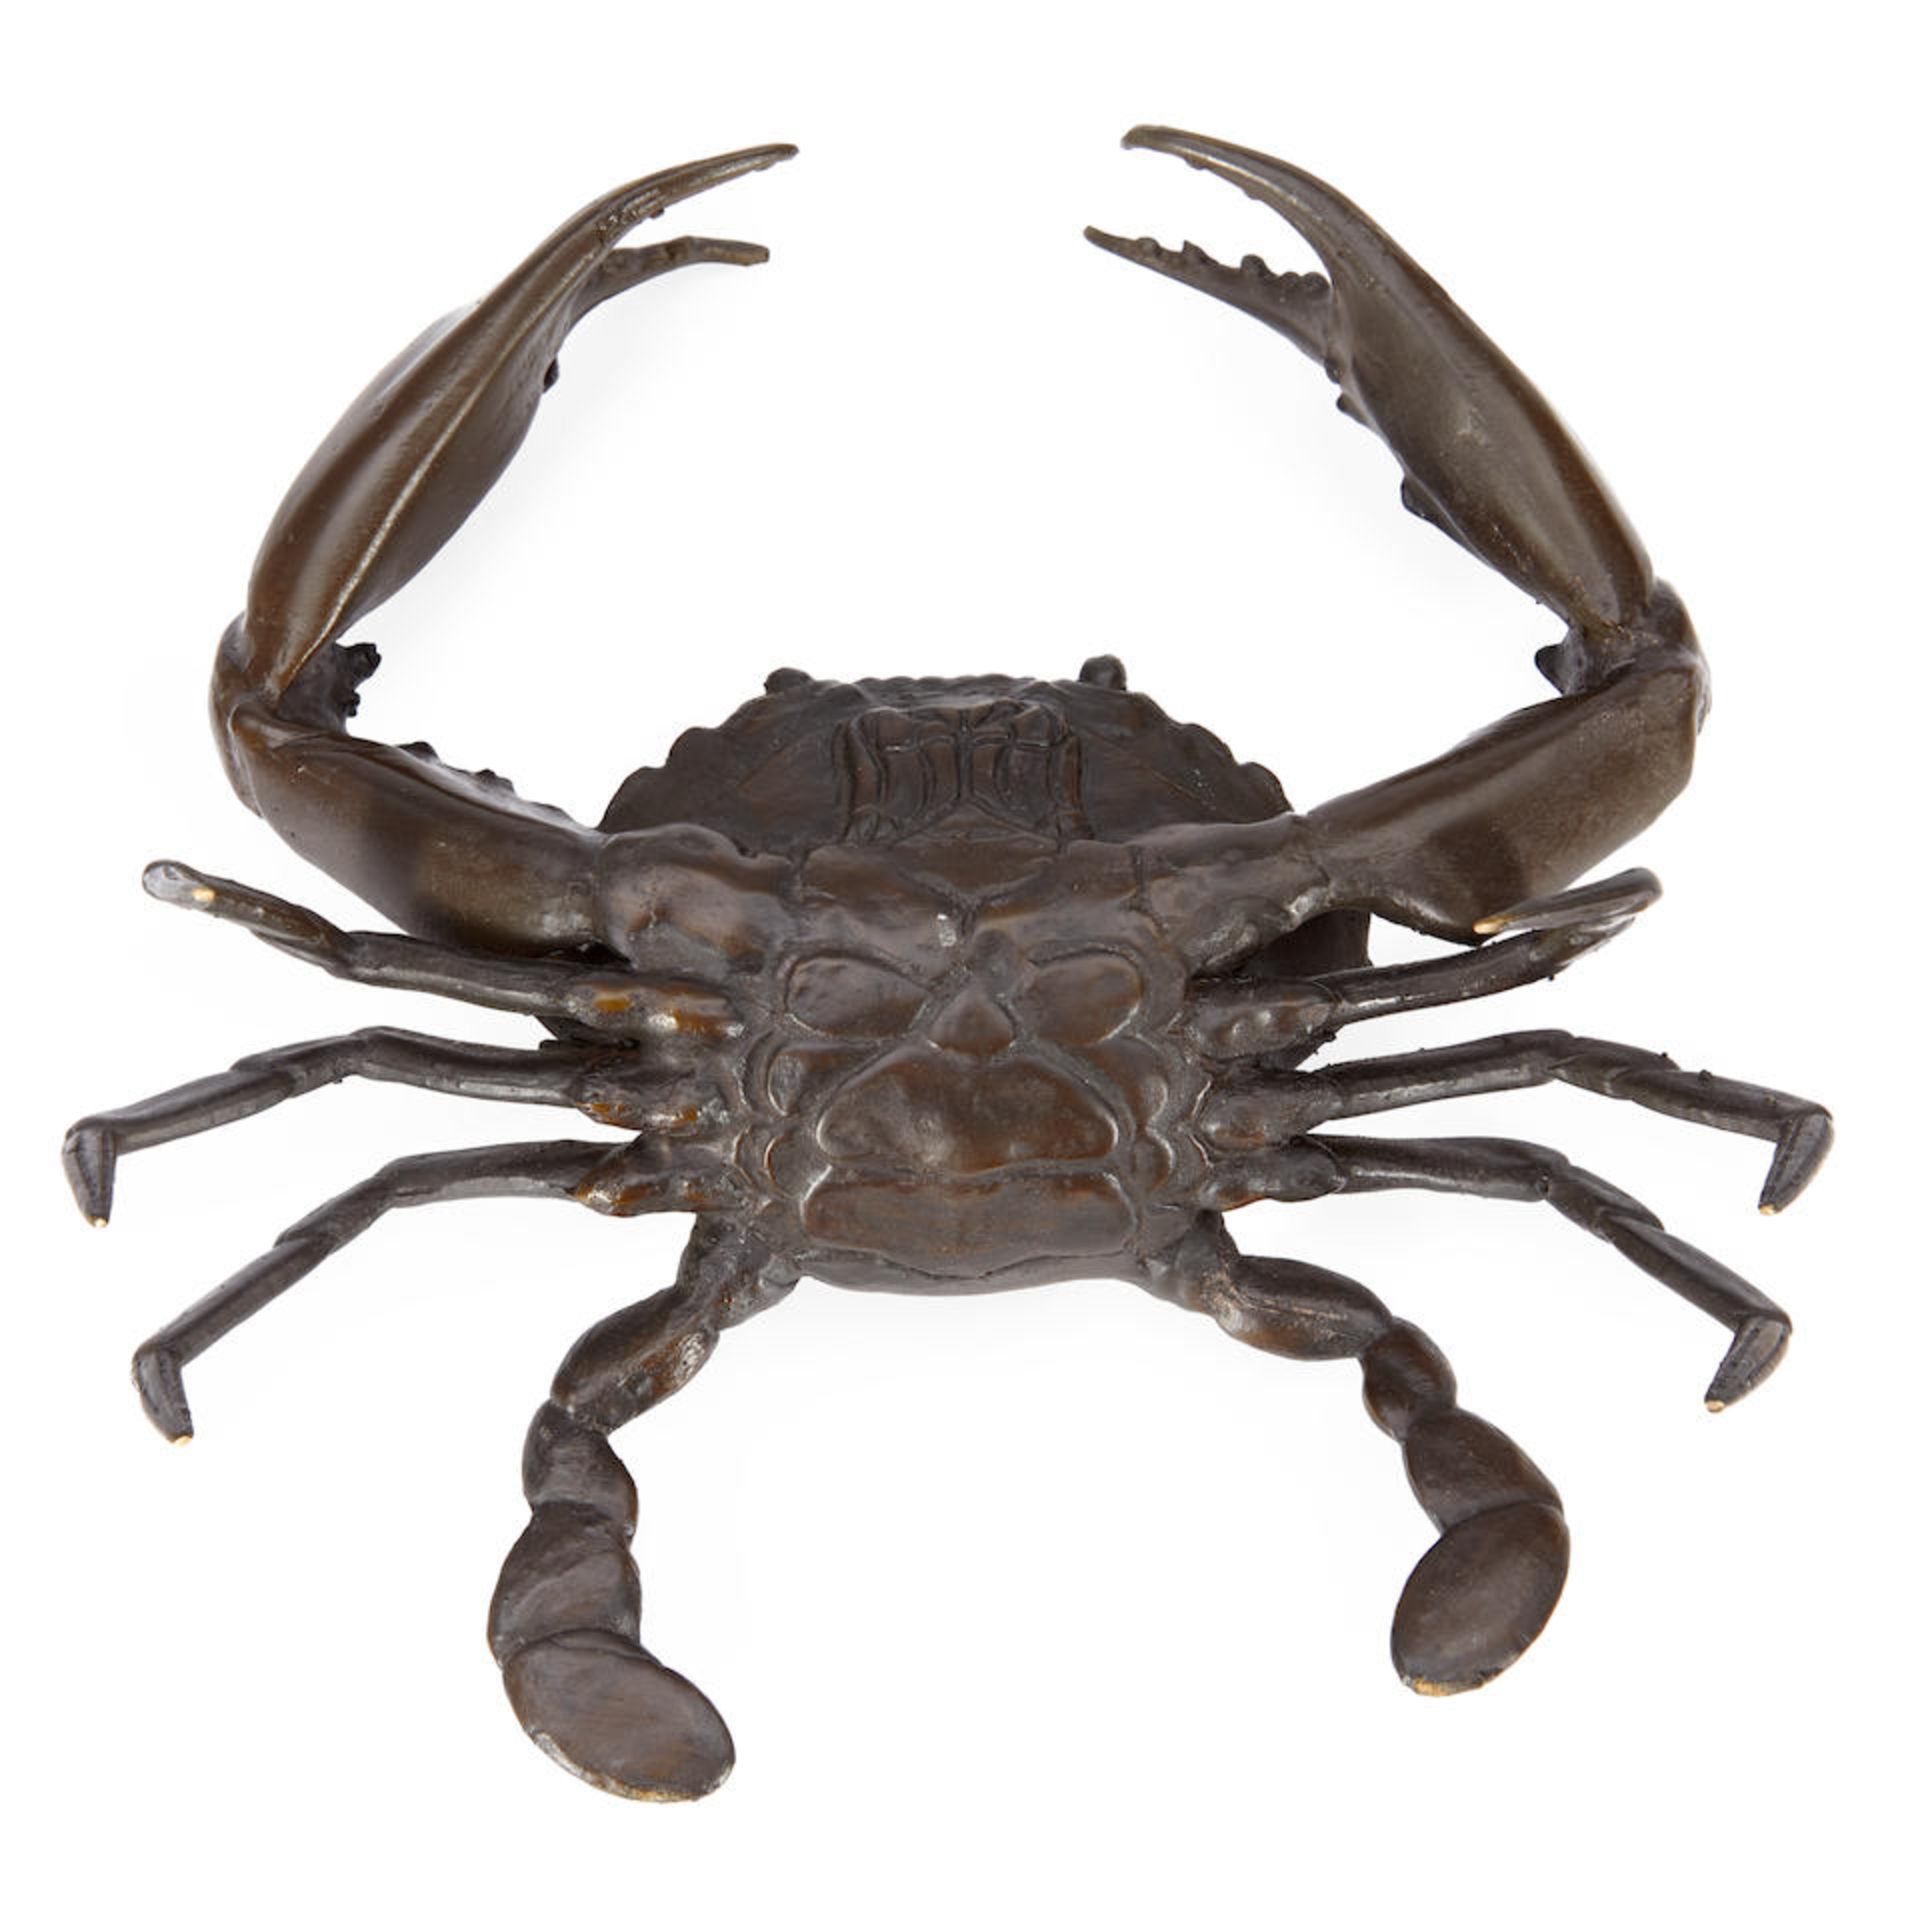 A BRONZE ARTICULATED MODEL OF A CRAB - Image 3 of 3